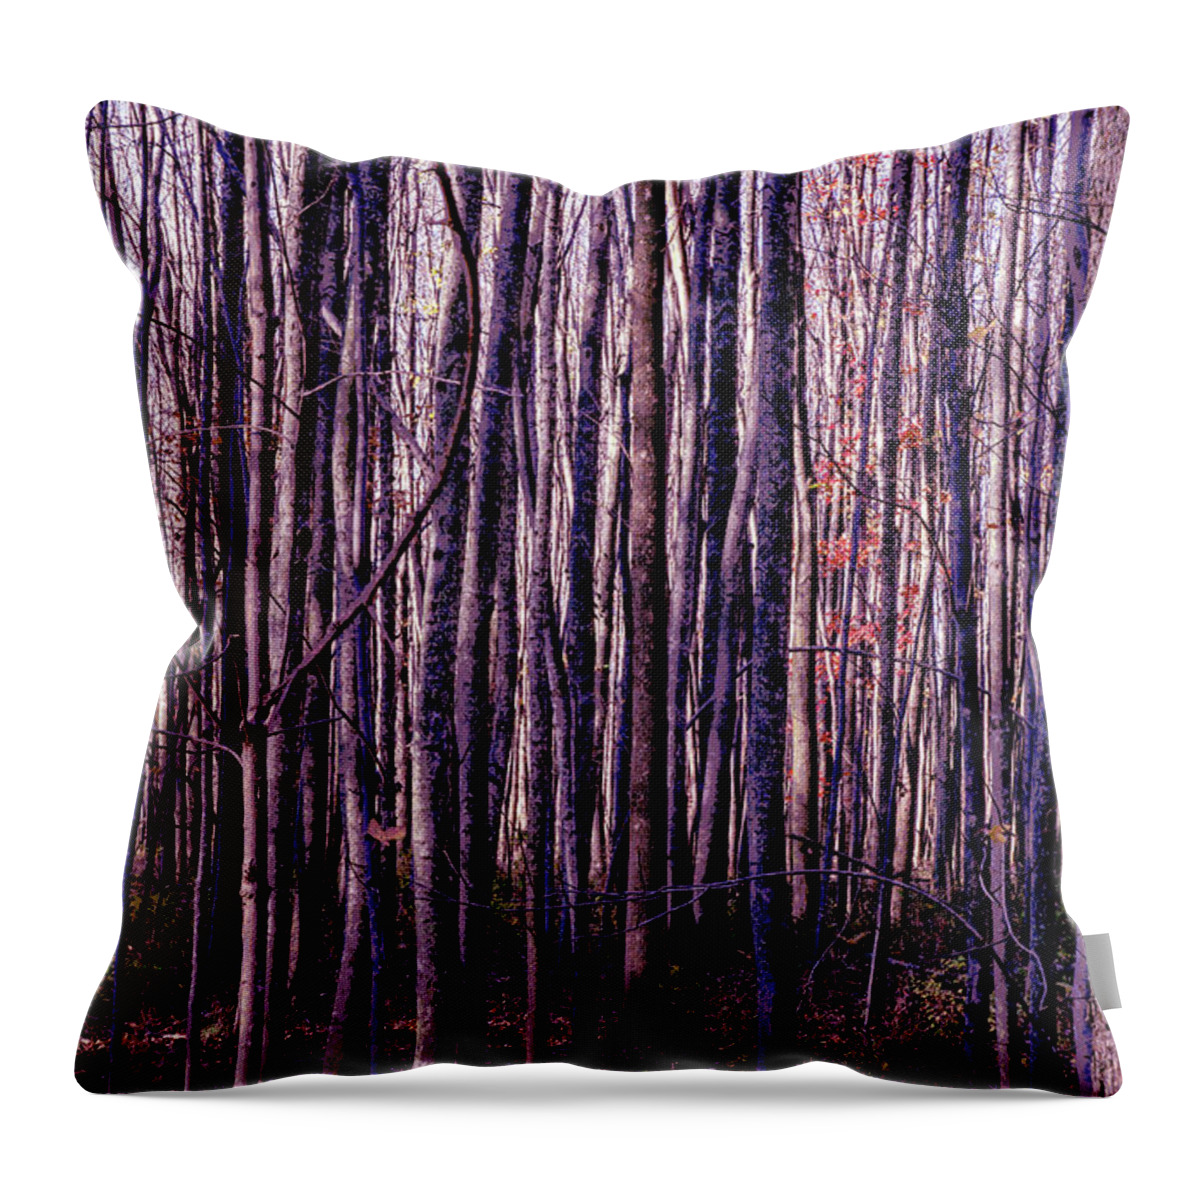 Treez Throw Pillow featuring the photograph Treez Magenta by Lon Dittrick